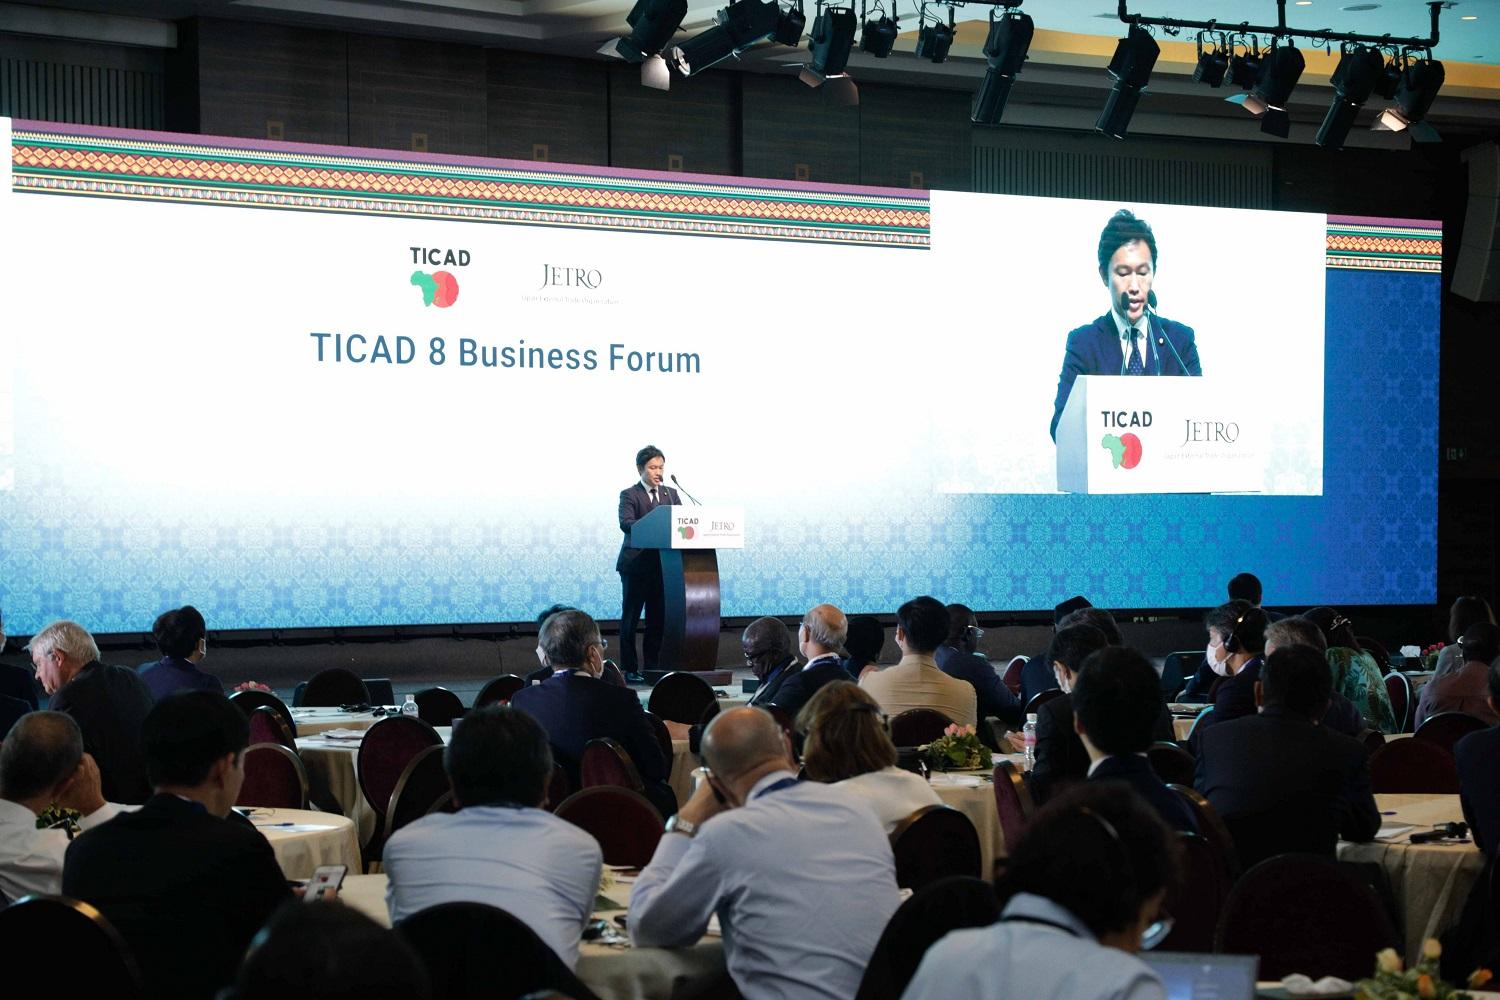 The business forum held on Saturday at the TICAD8